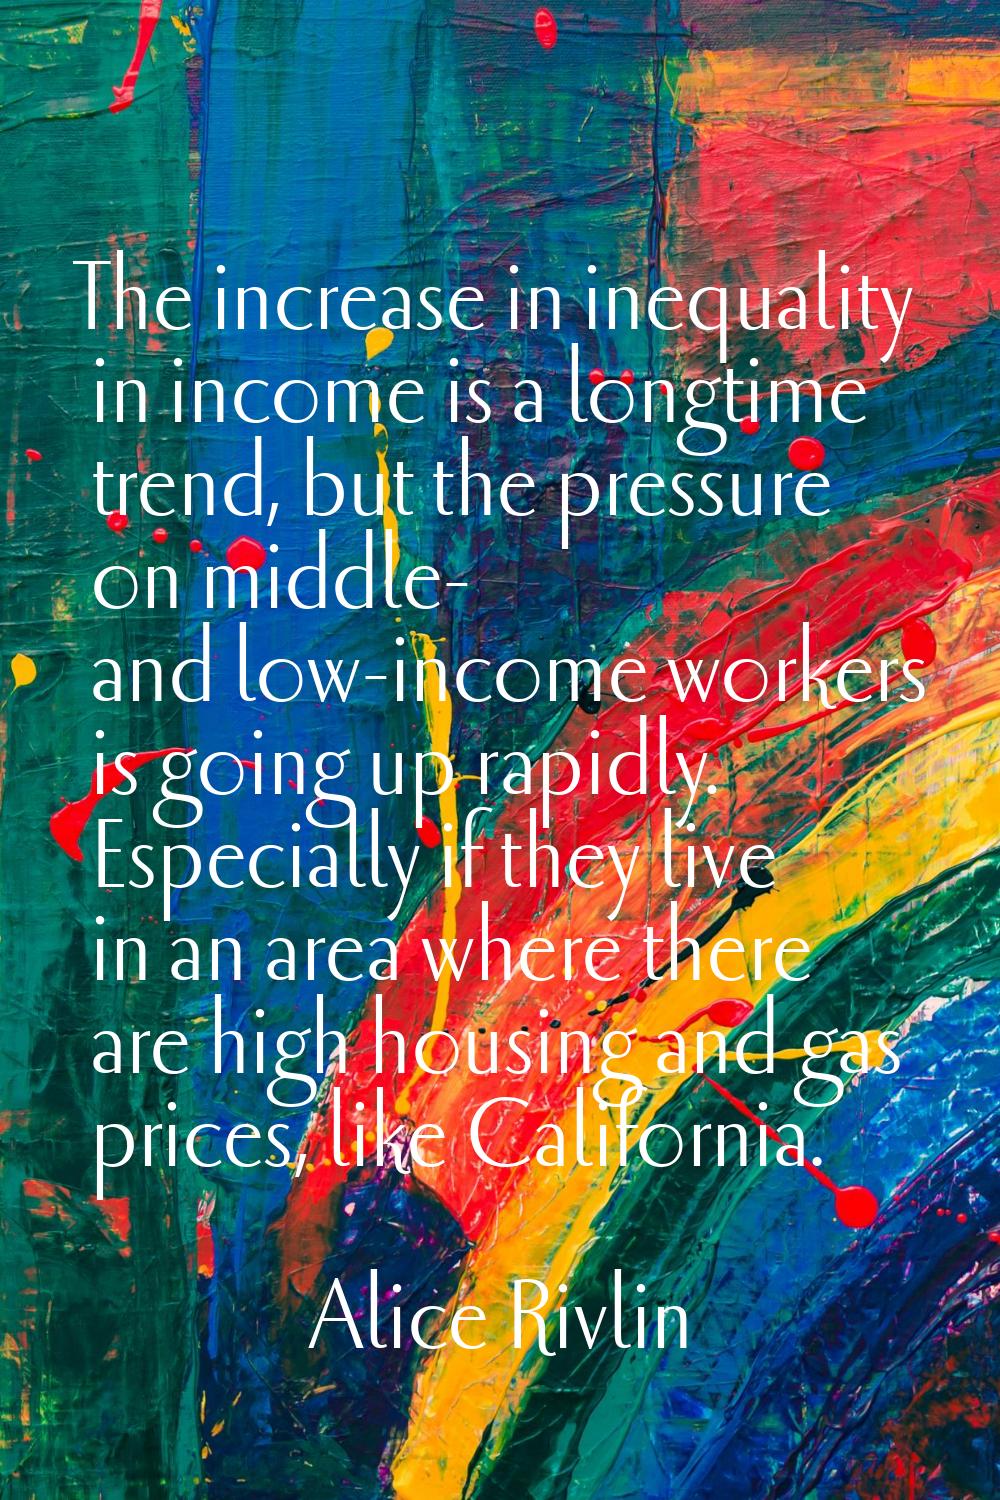 The increase in inequality in income is a longtime trend, but the pressure on middle- and low-incom